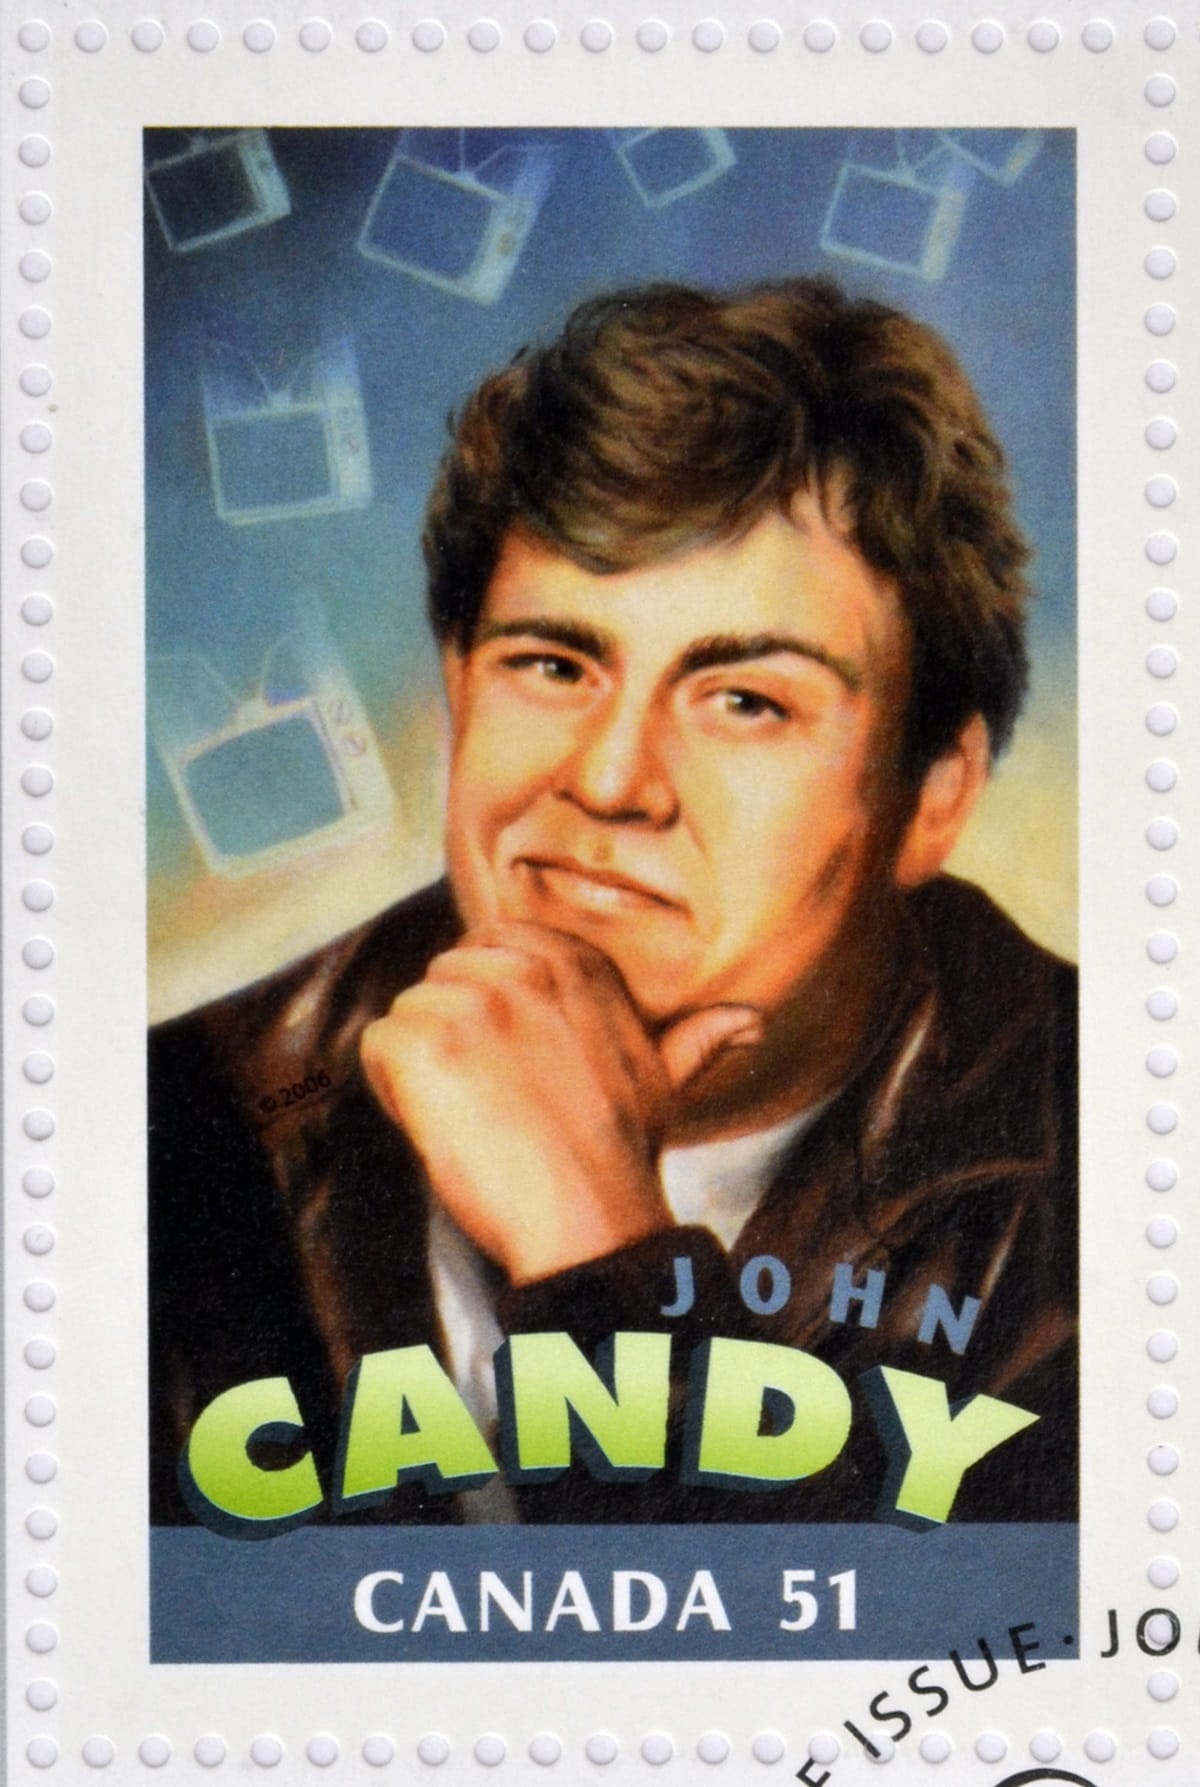 In 2006, Canada issued a stamp honoring successful Canadian actors in Hollywood, featuring beloved actor John Candy, who had made a name for himself in numerous Hollywood films